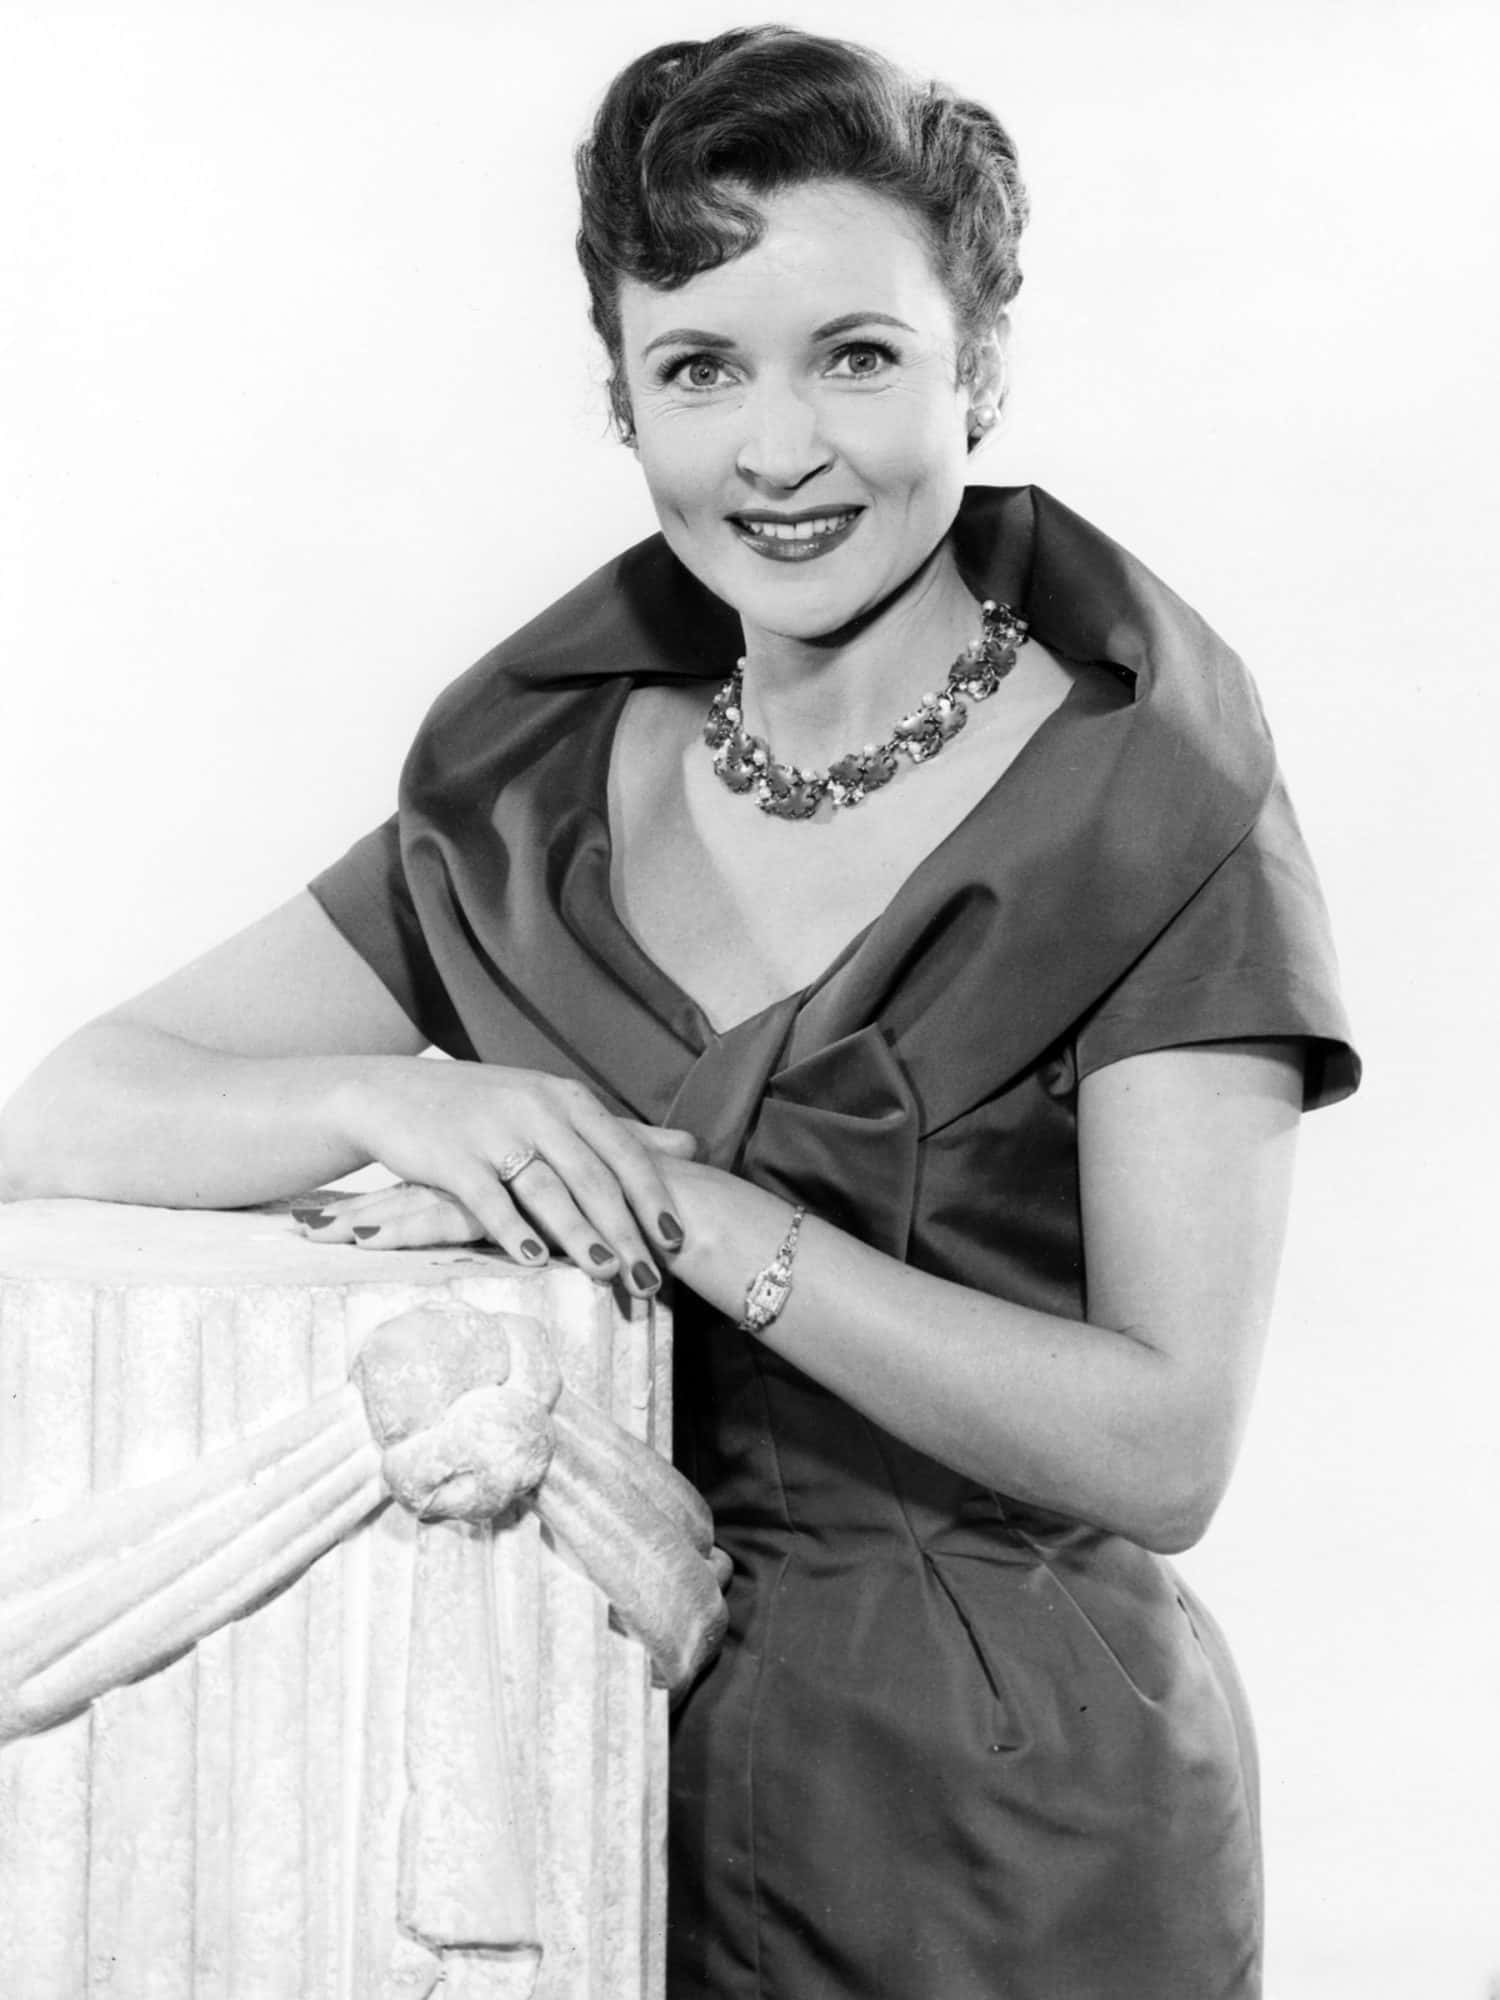 A radiant Betty White smiling and posing in a stylized photoshoot